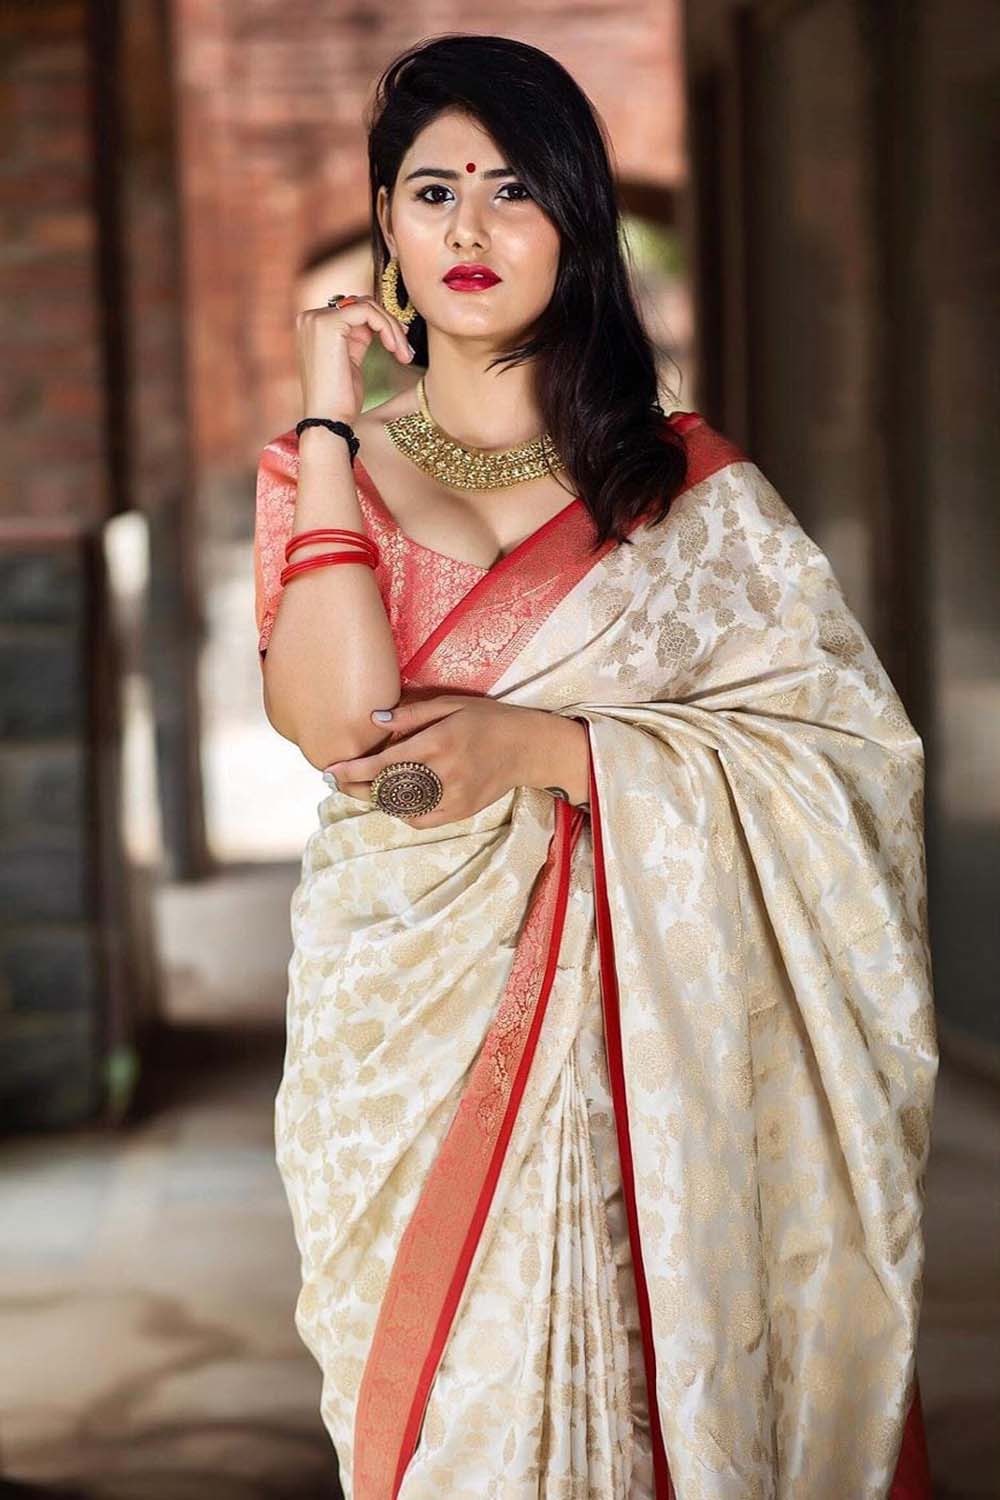 Buy Cream White Saree In Silk With Weaved Floral Motifs In Repeat Pattern  Online - Kalki Fashion